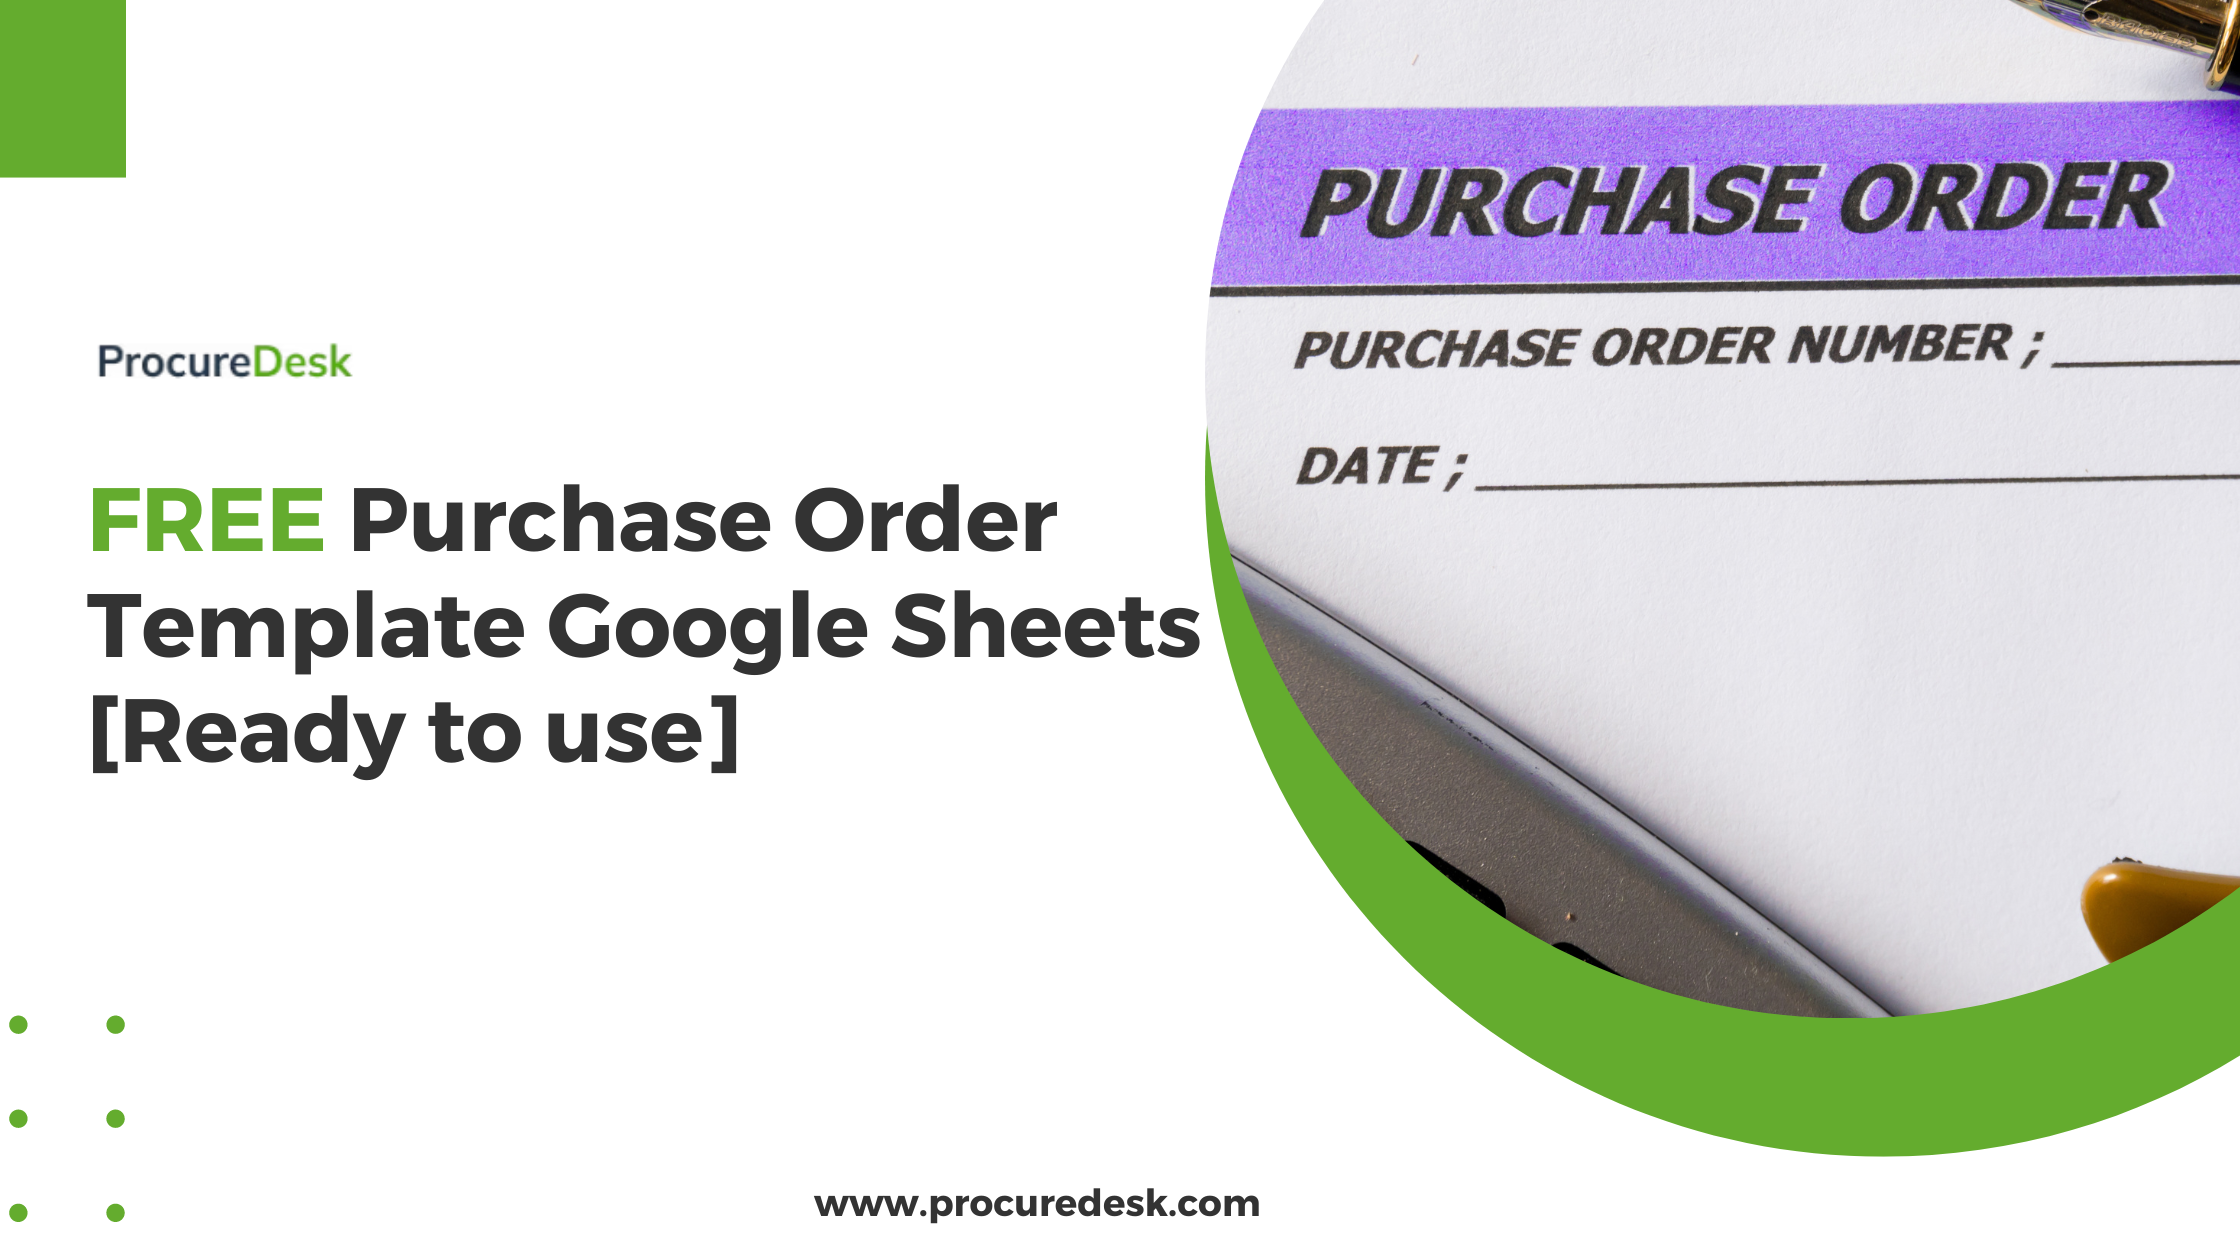 FREE Purchase Order Template Google Sheets Ready To Use ProcureDesk